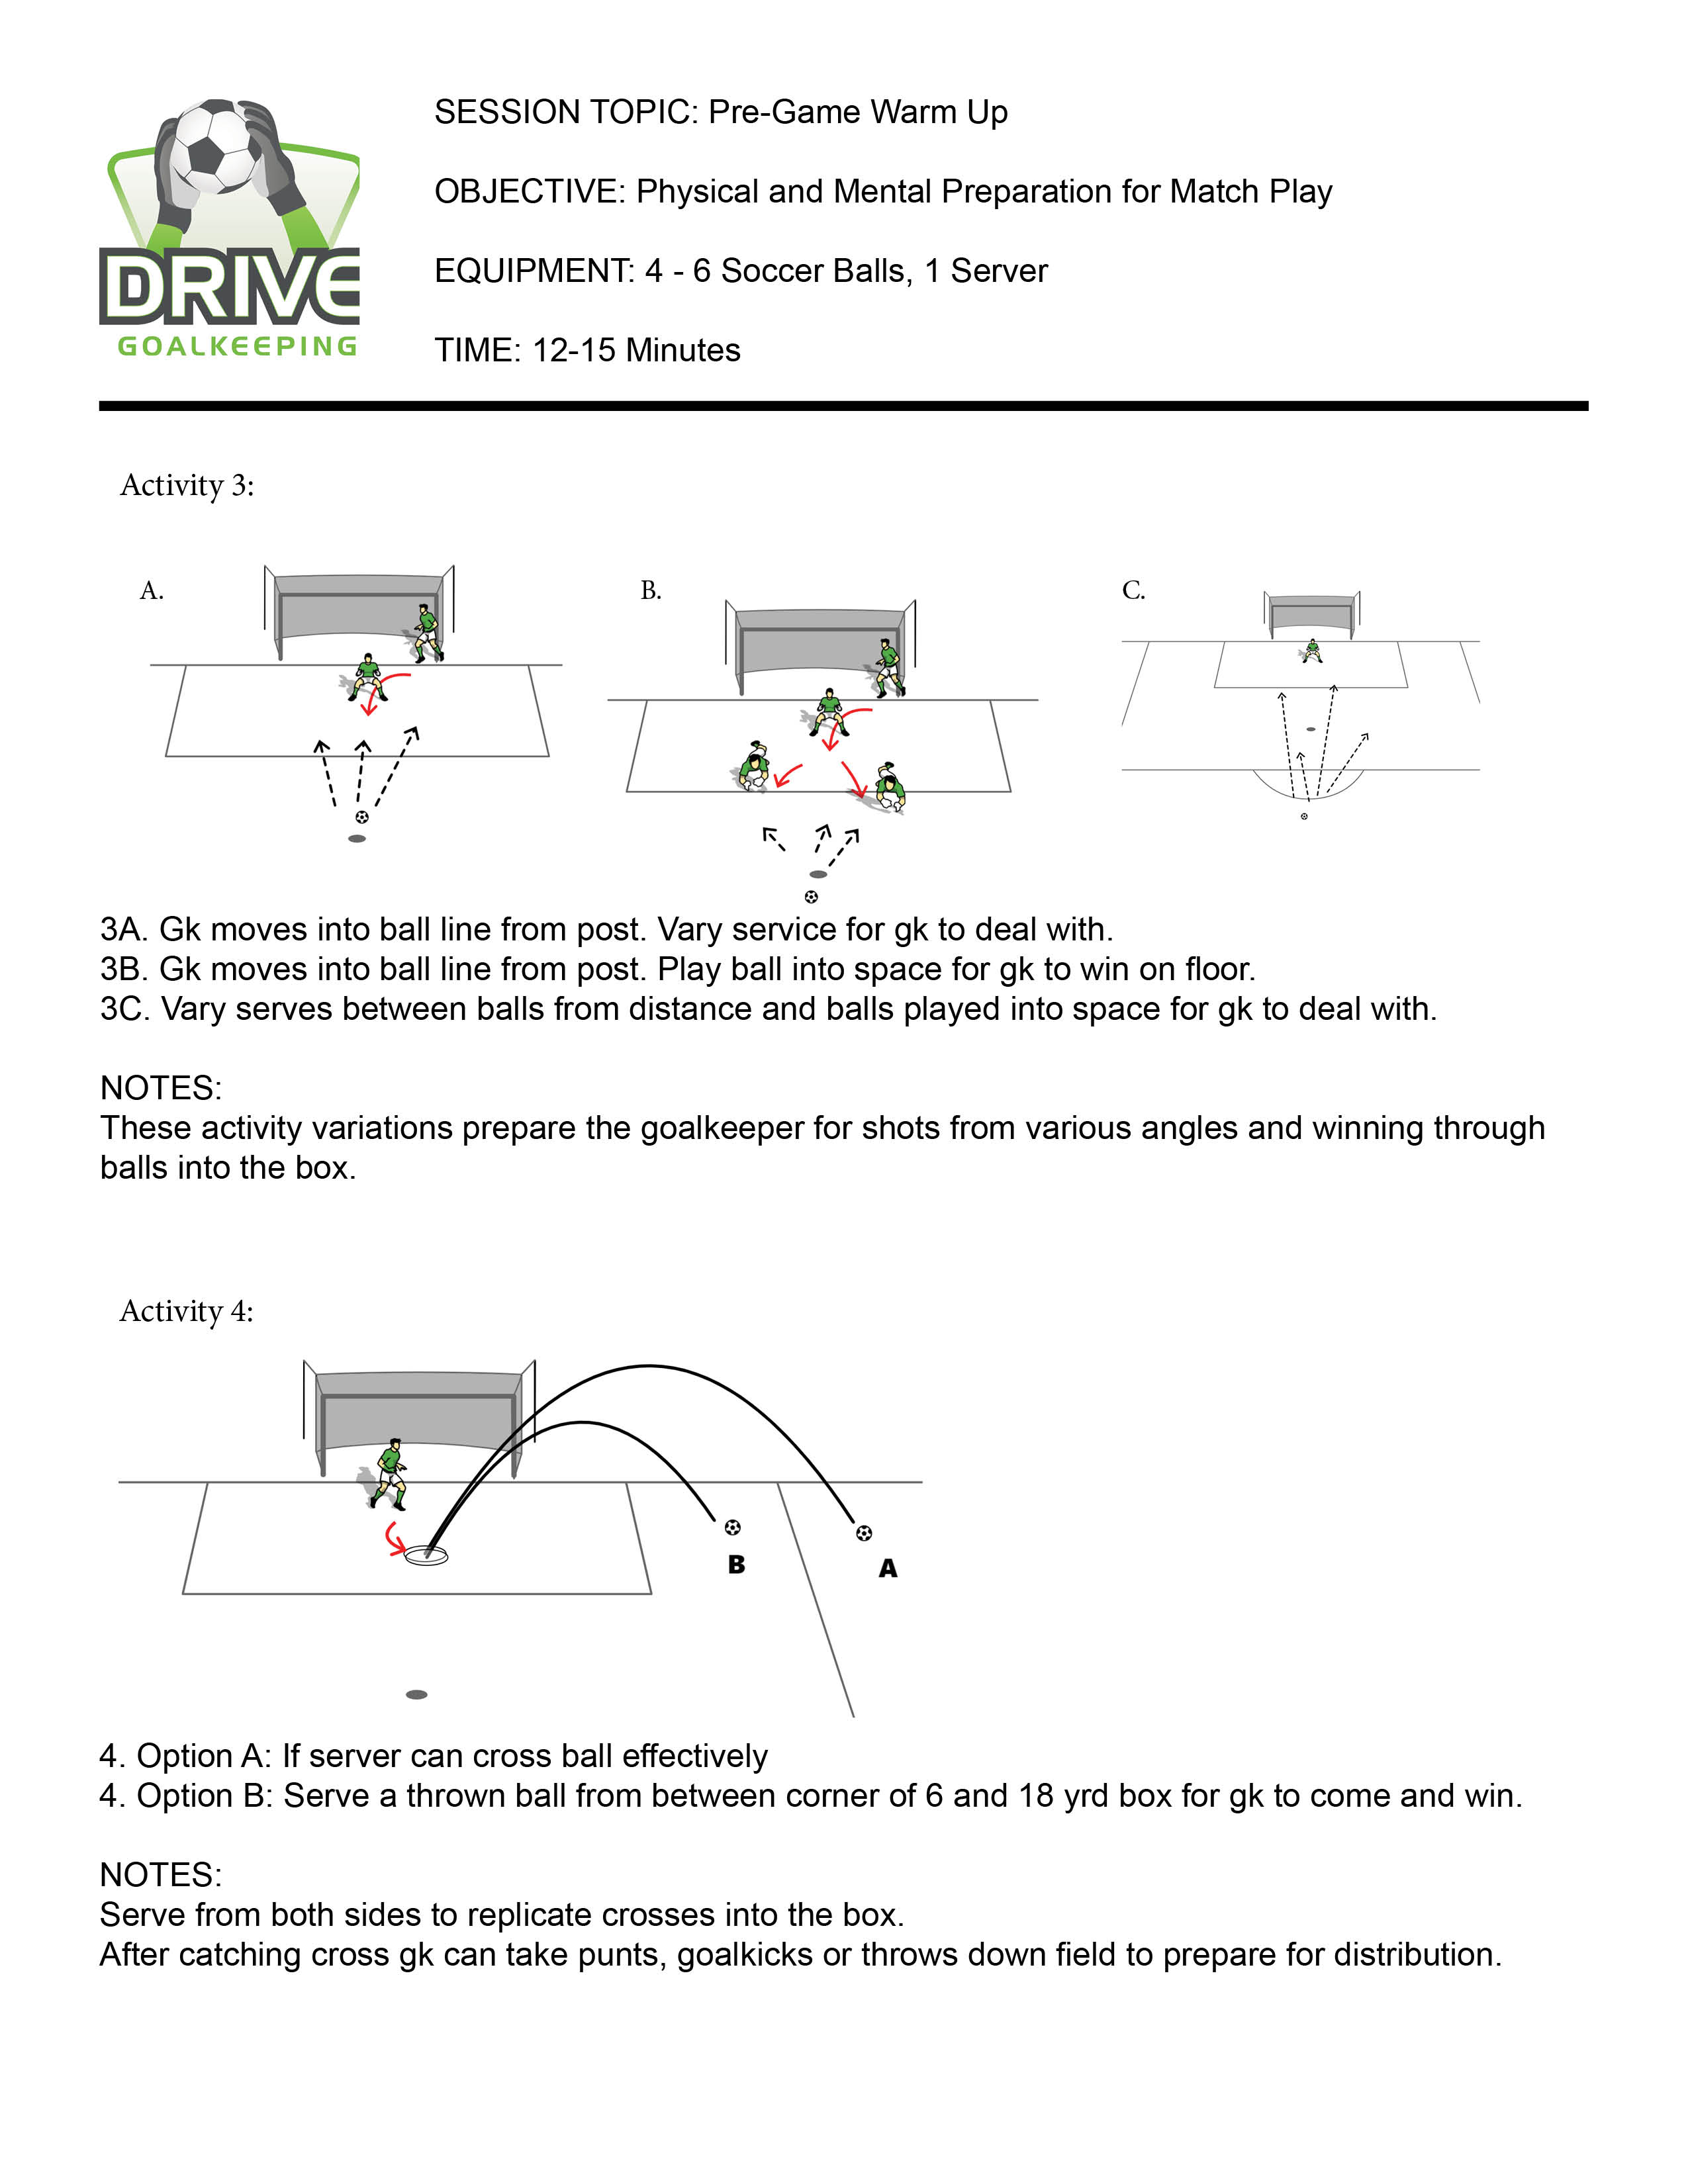 Four Pre-Game Warm Up Activities to Try Before Your Goalkeeper's Next Match PART 2